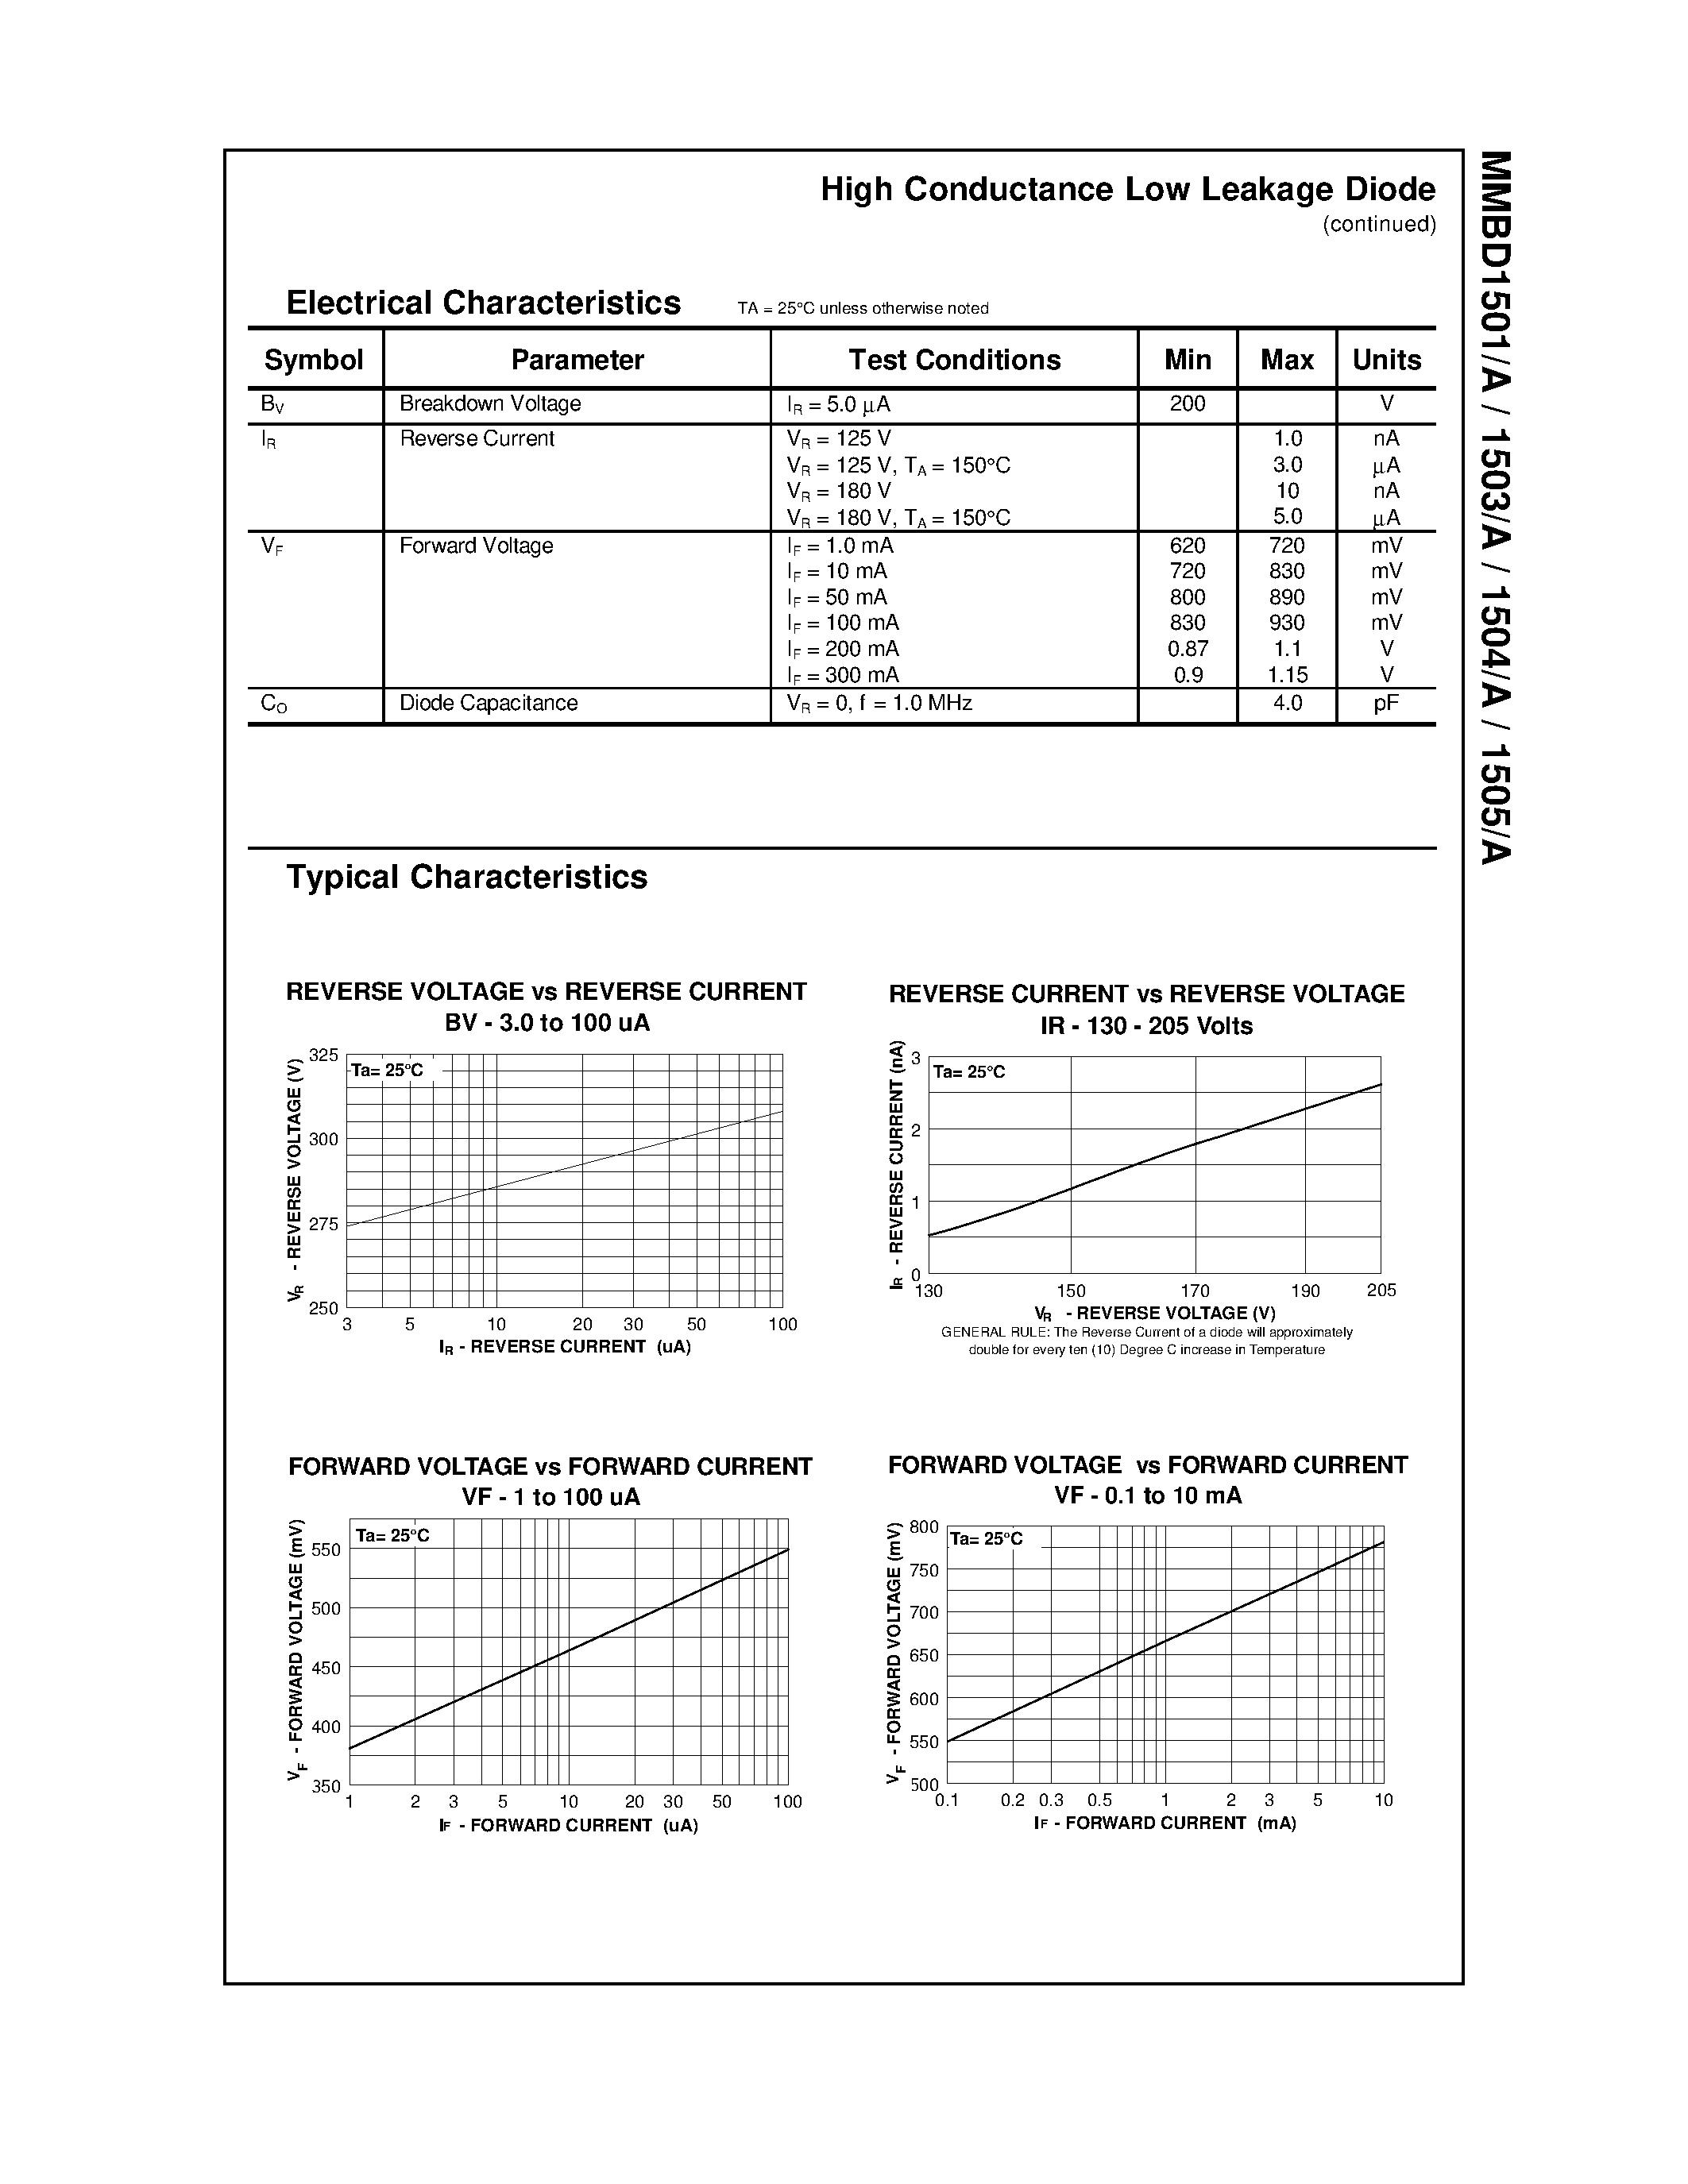 Datasheet MMBD1503 - High Conductance Low Leakage Diode page 2